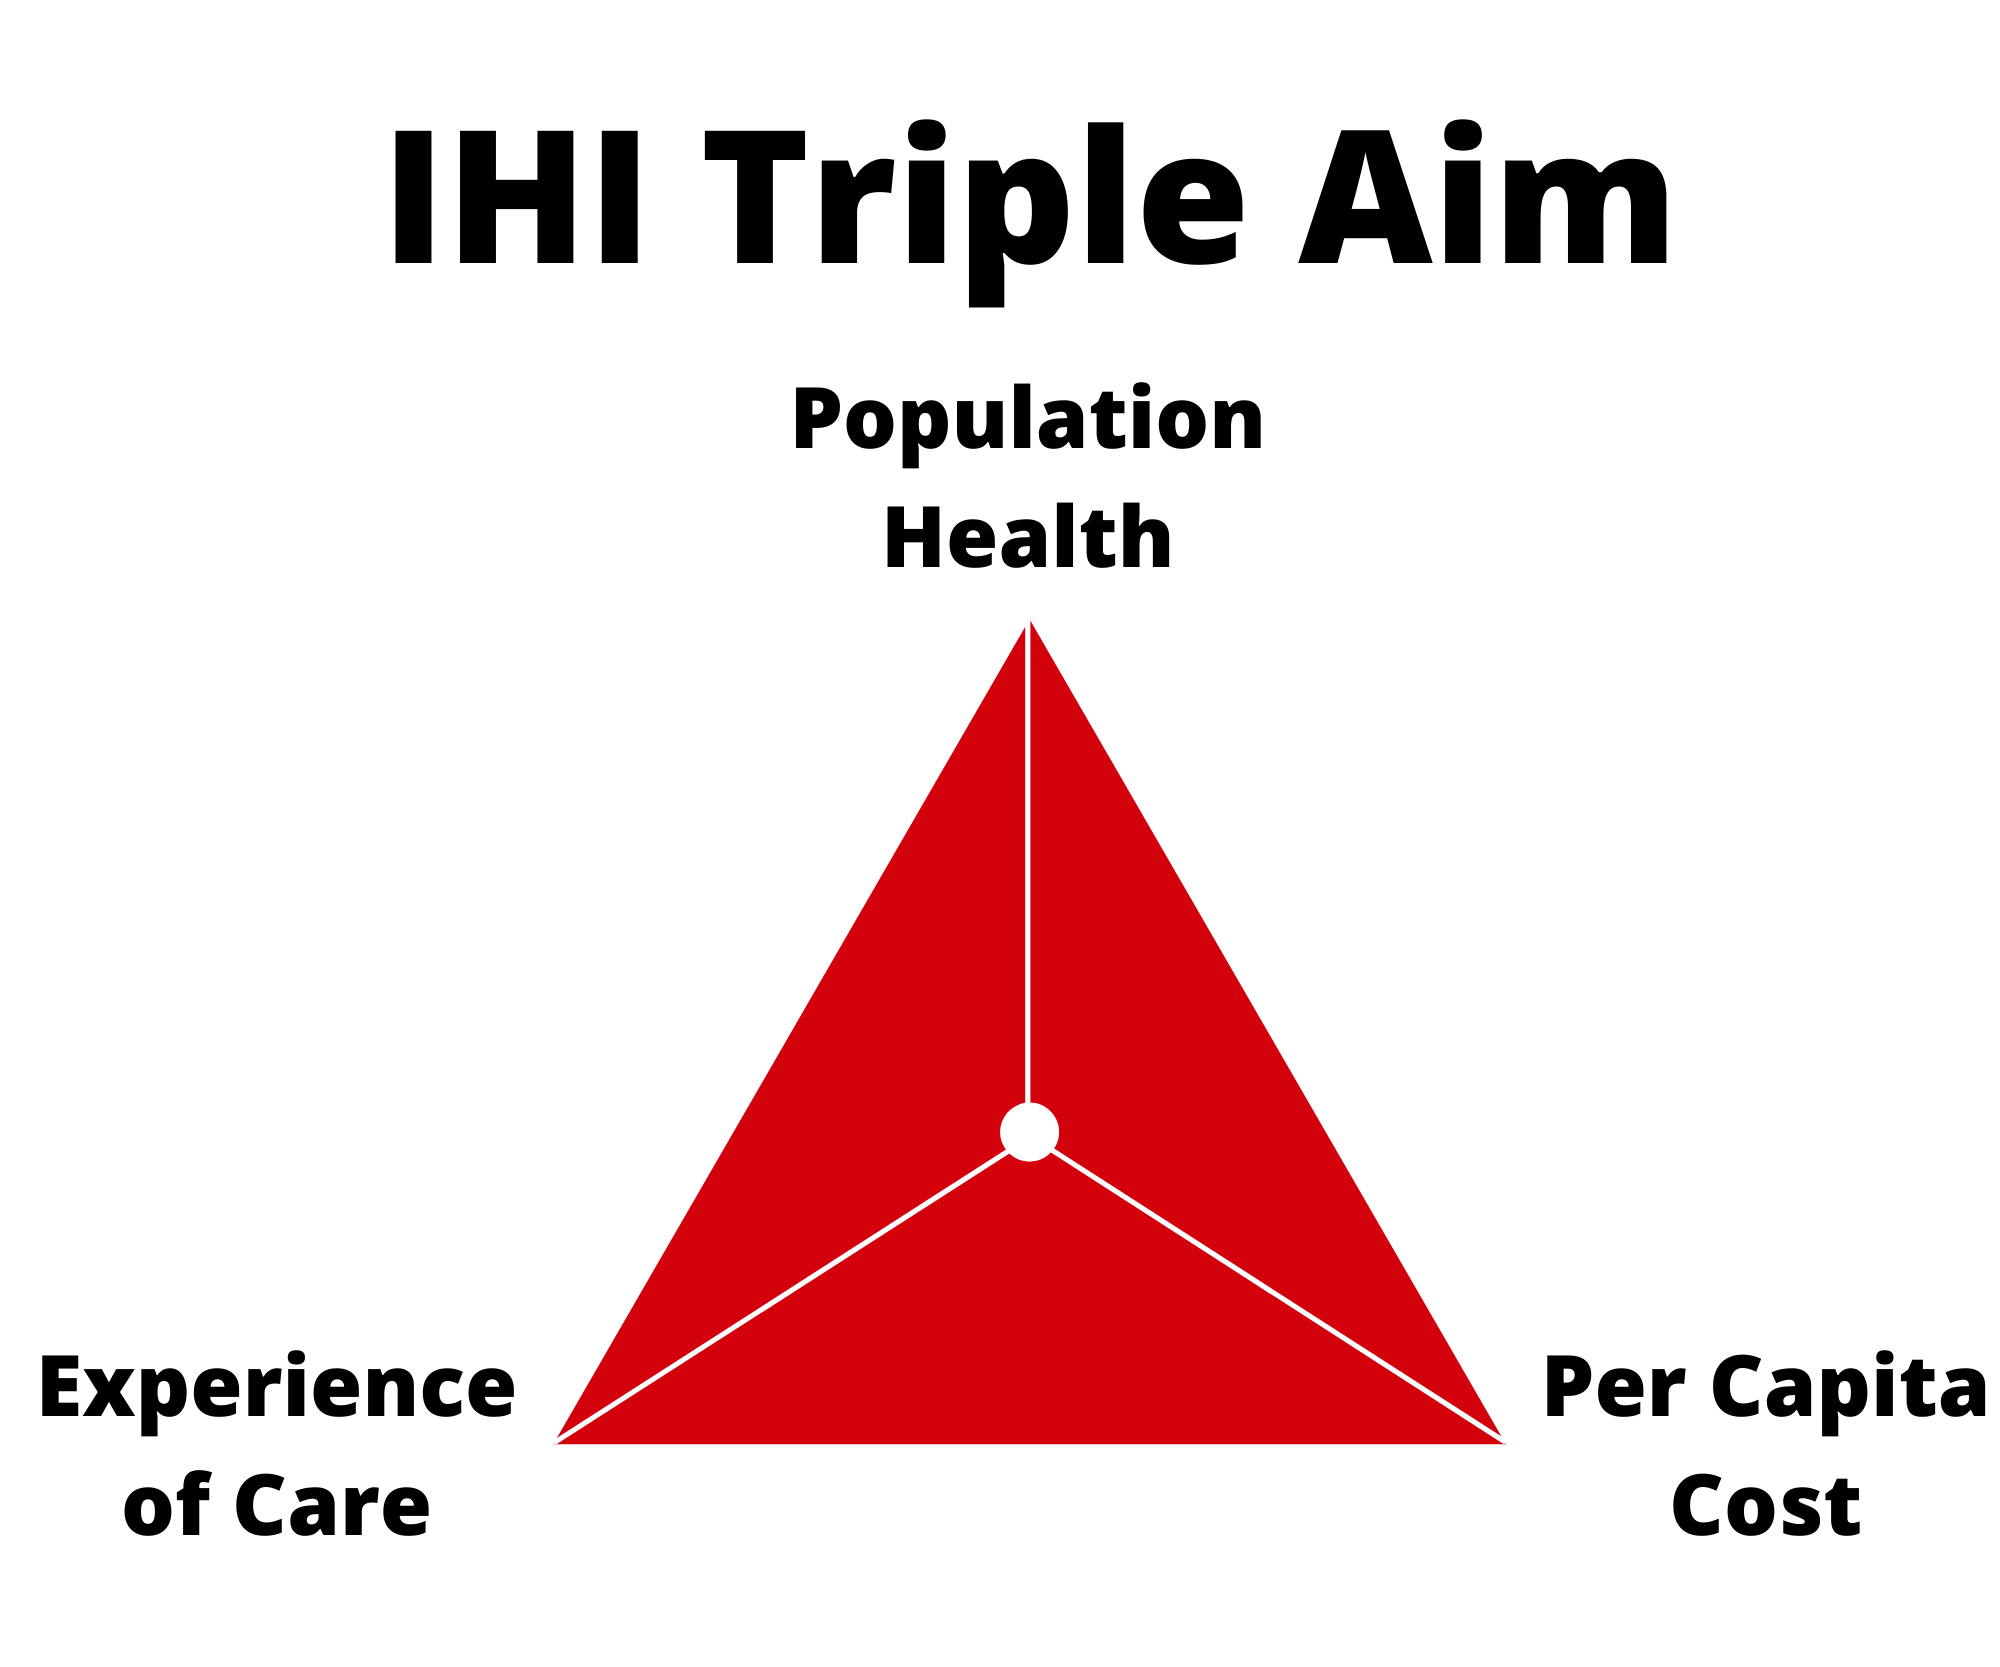 Illustration of the IHI Triple Aim, consisting of (1) Population health; (2) Experience of care; and (3) Per capita cost